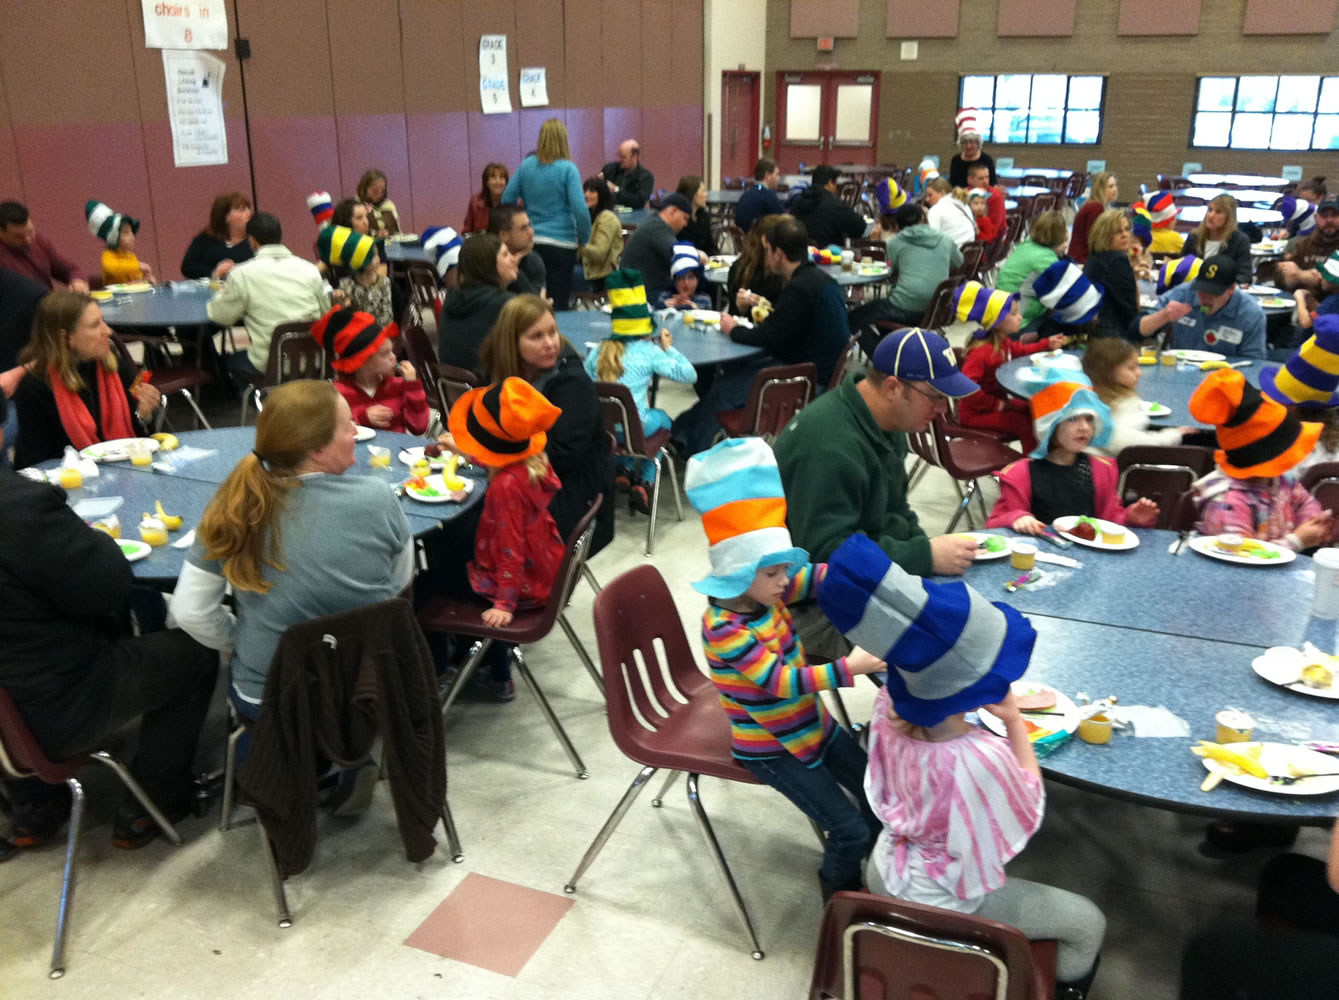 Students and adults alike enjoy their green eggs and ham breakfast at Chinook Elementary School.